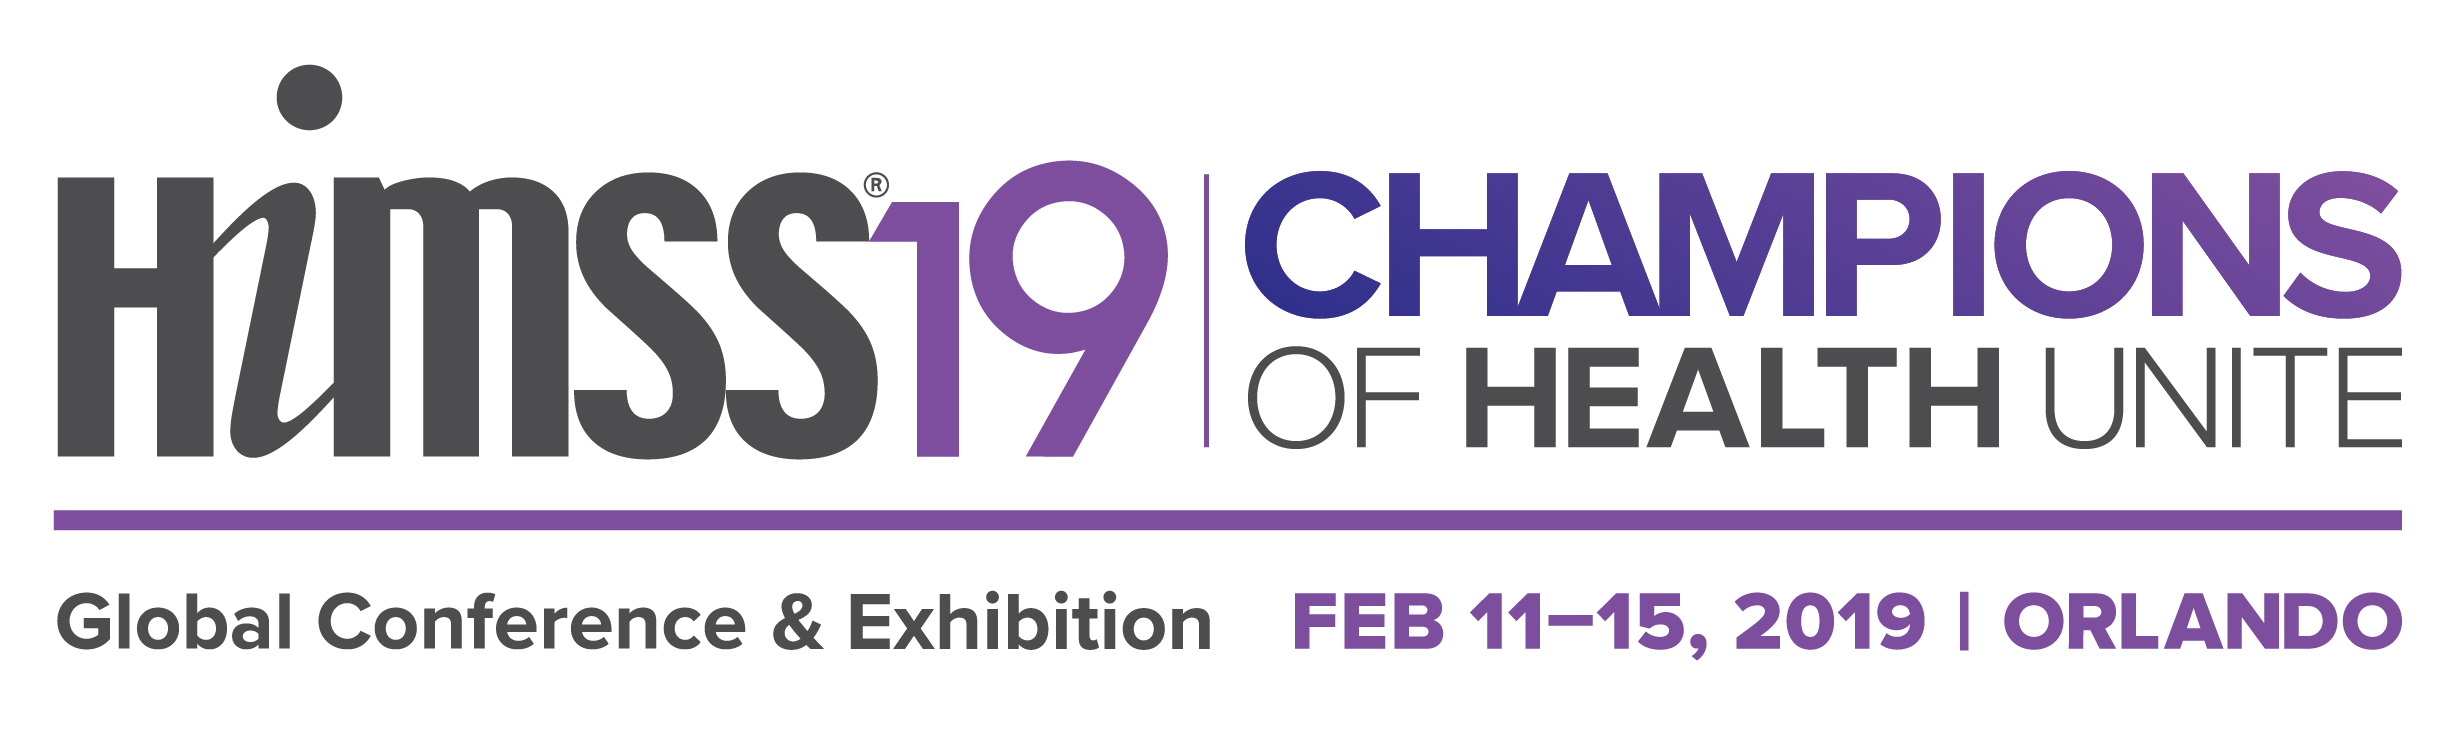 GRM Attending HIMSS 2019 Conference in Orlando, Florida February 11 to 15